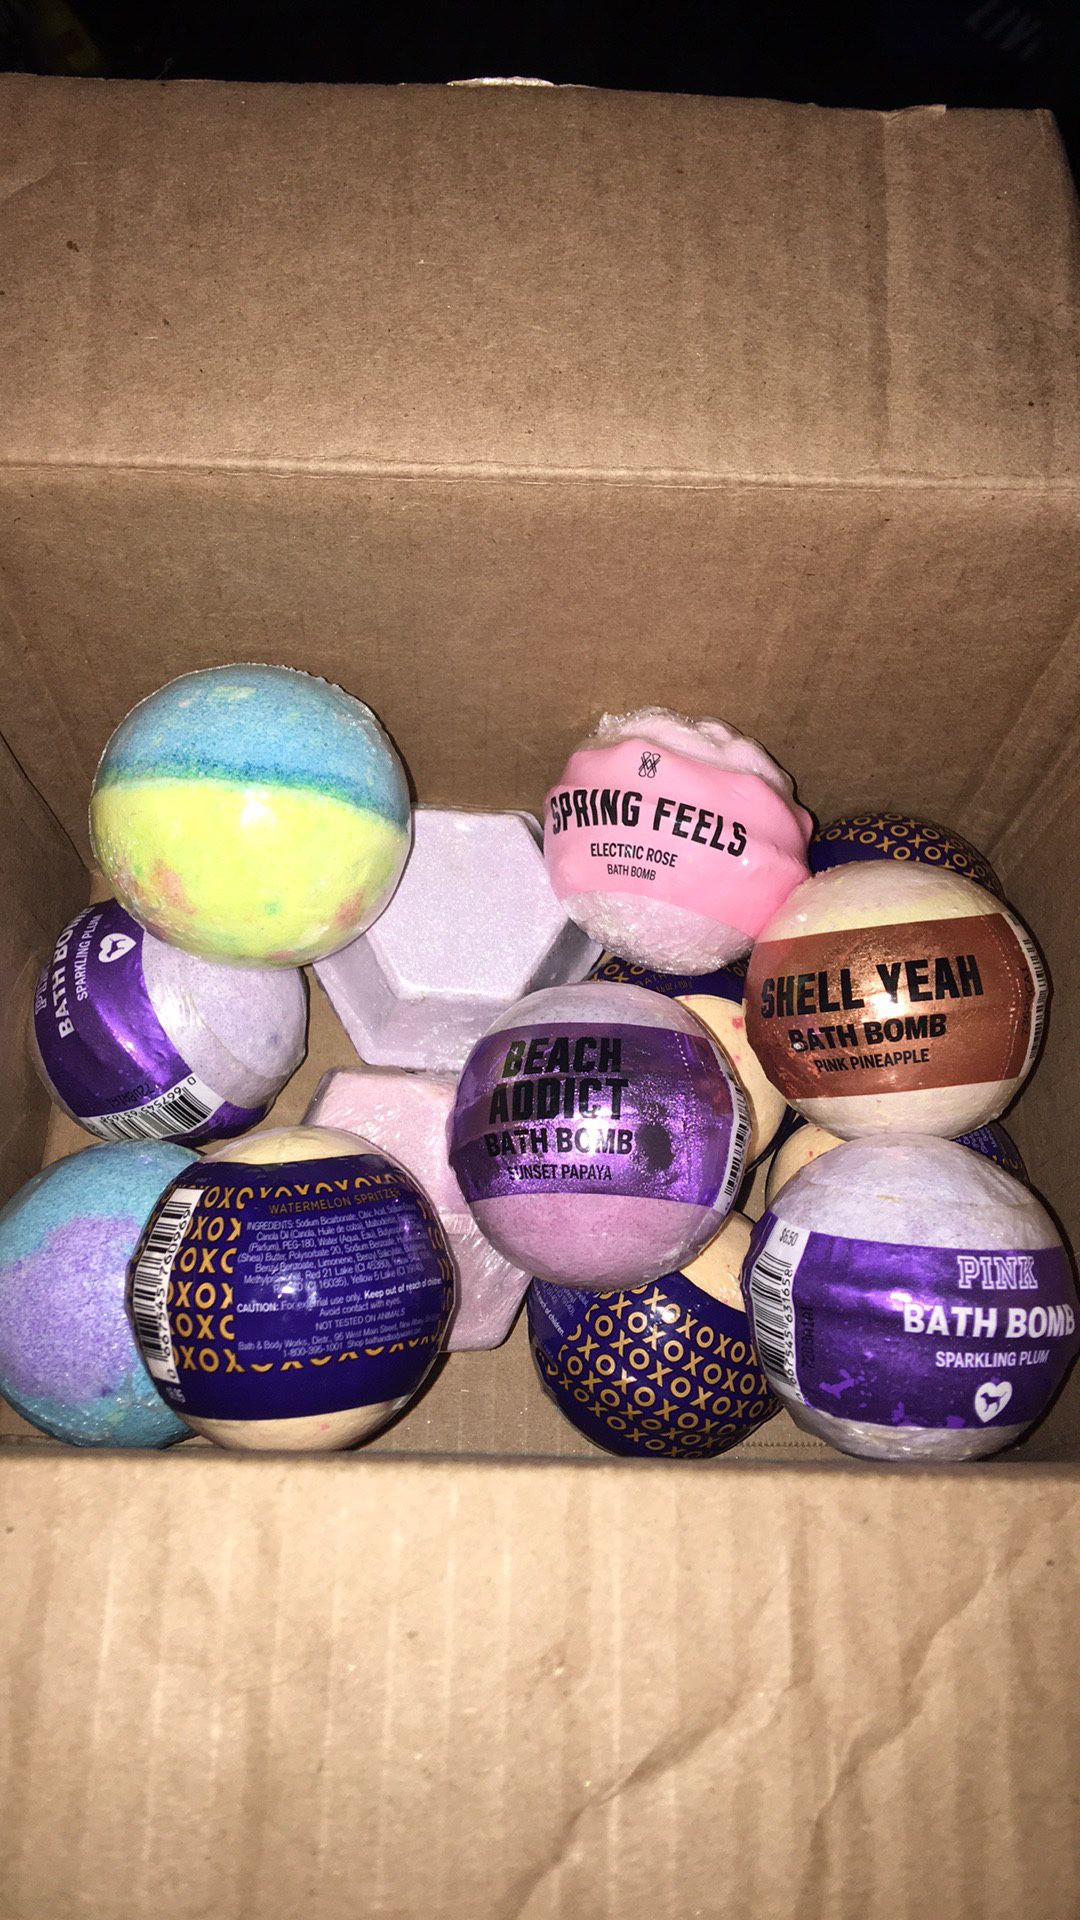 V.S and Bath and Body works bath bombs